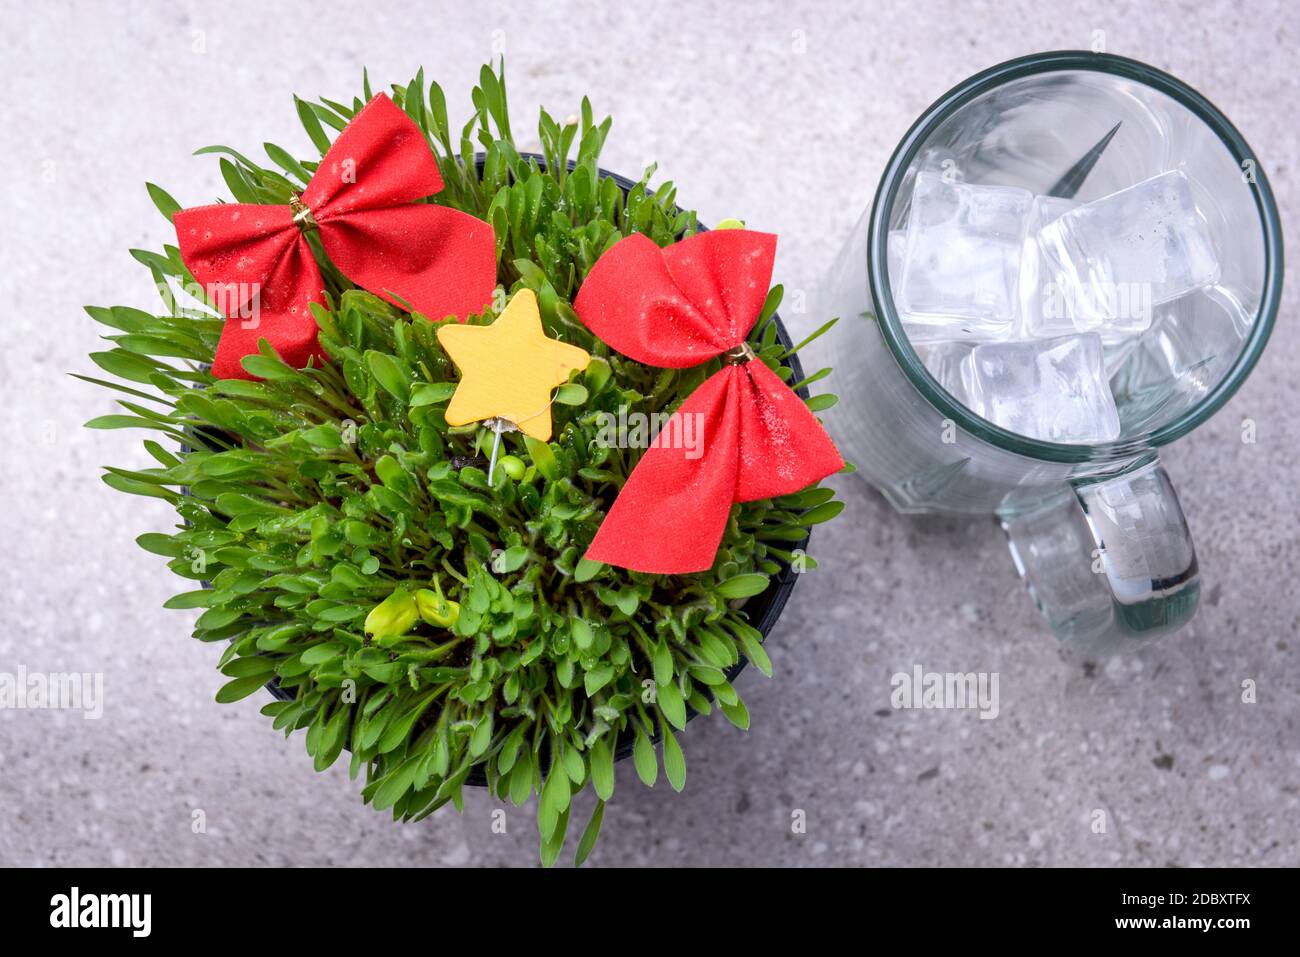 Close up view of millet grass plant with Christmas ornament in the pot and glasses with an ice cube on the desk Stock Photo